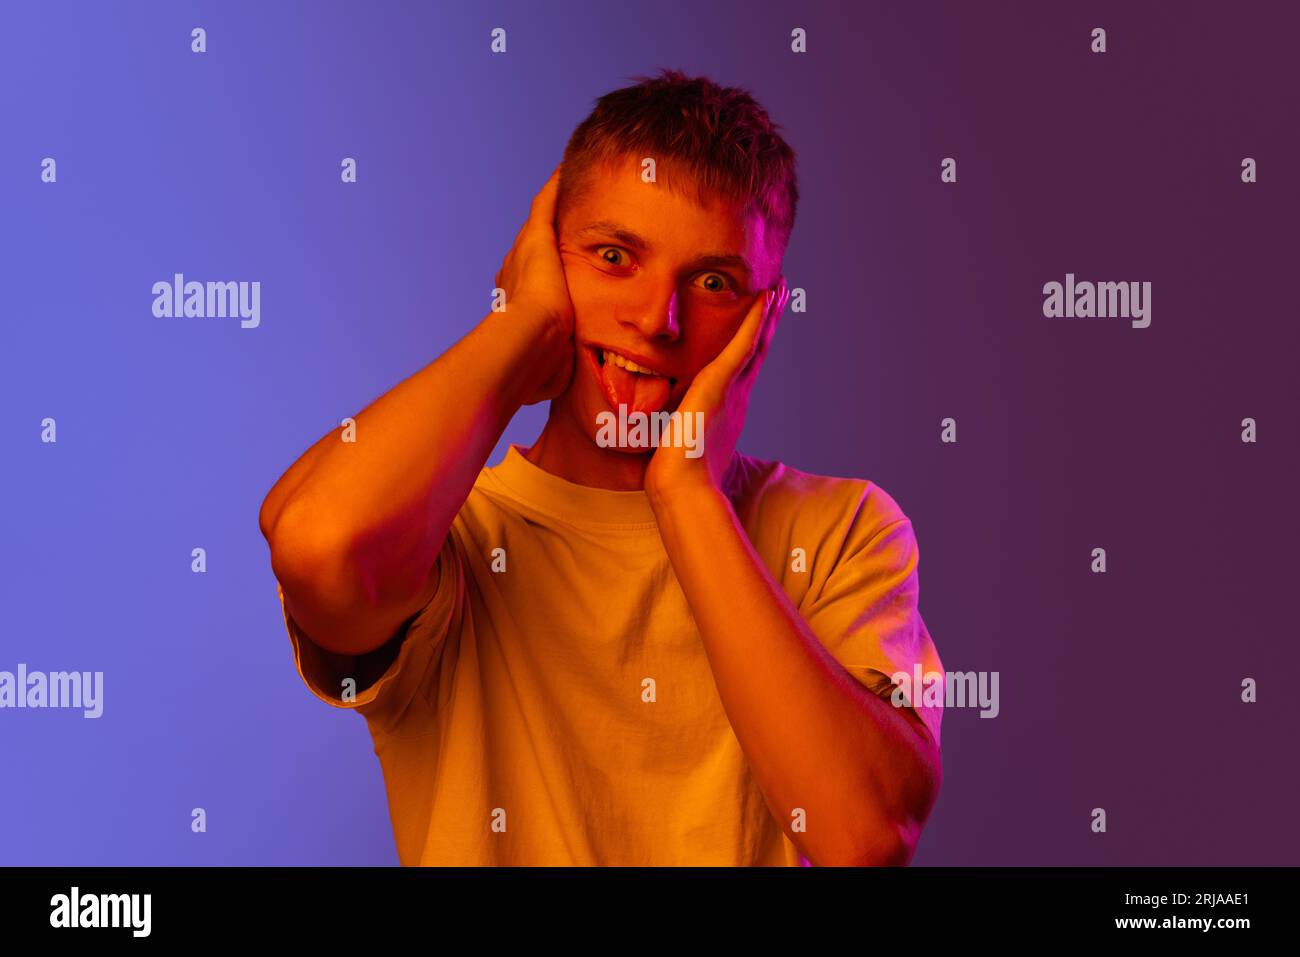 Young emotional guy posing with funny, meme, grimacing face against  gradient purple background in neon light Stock Photo - Alamy